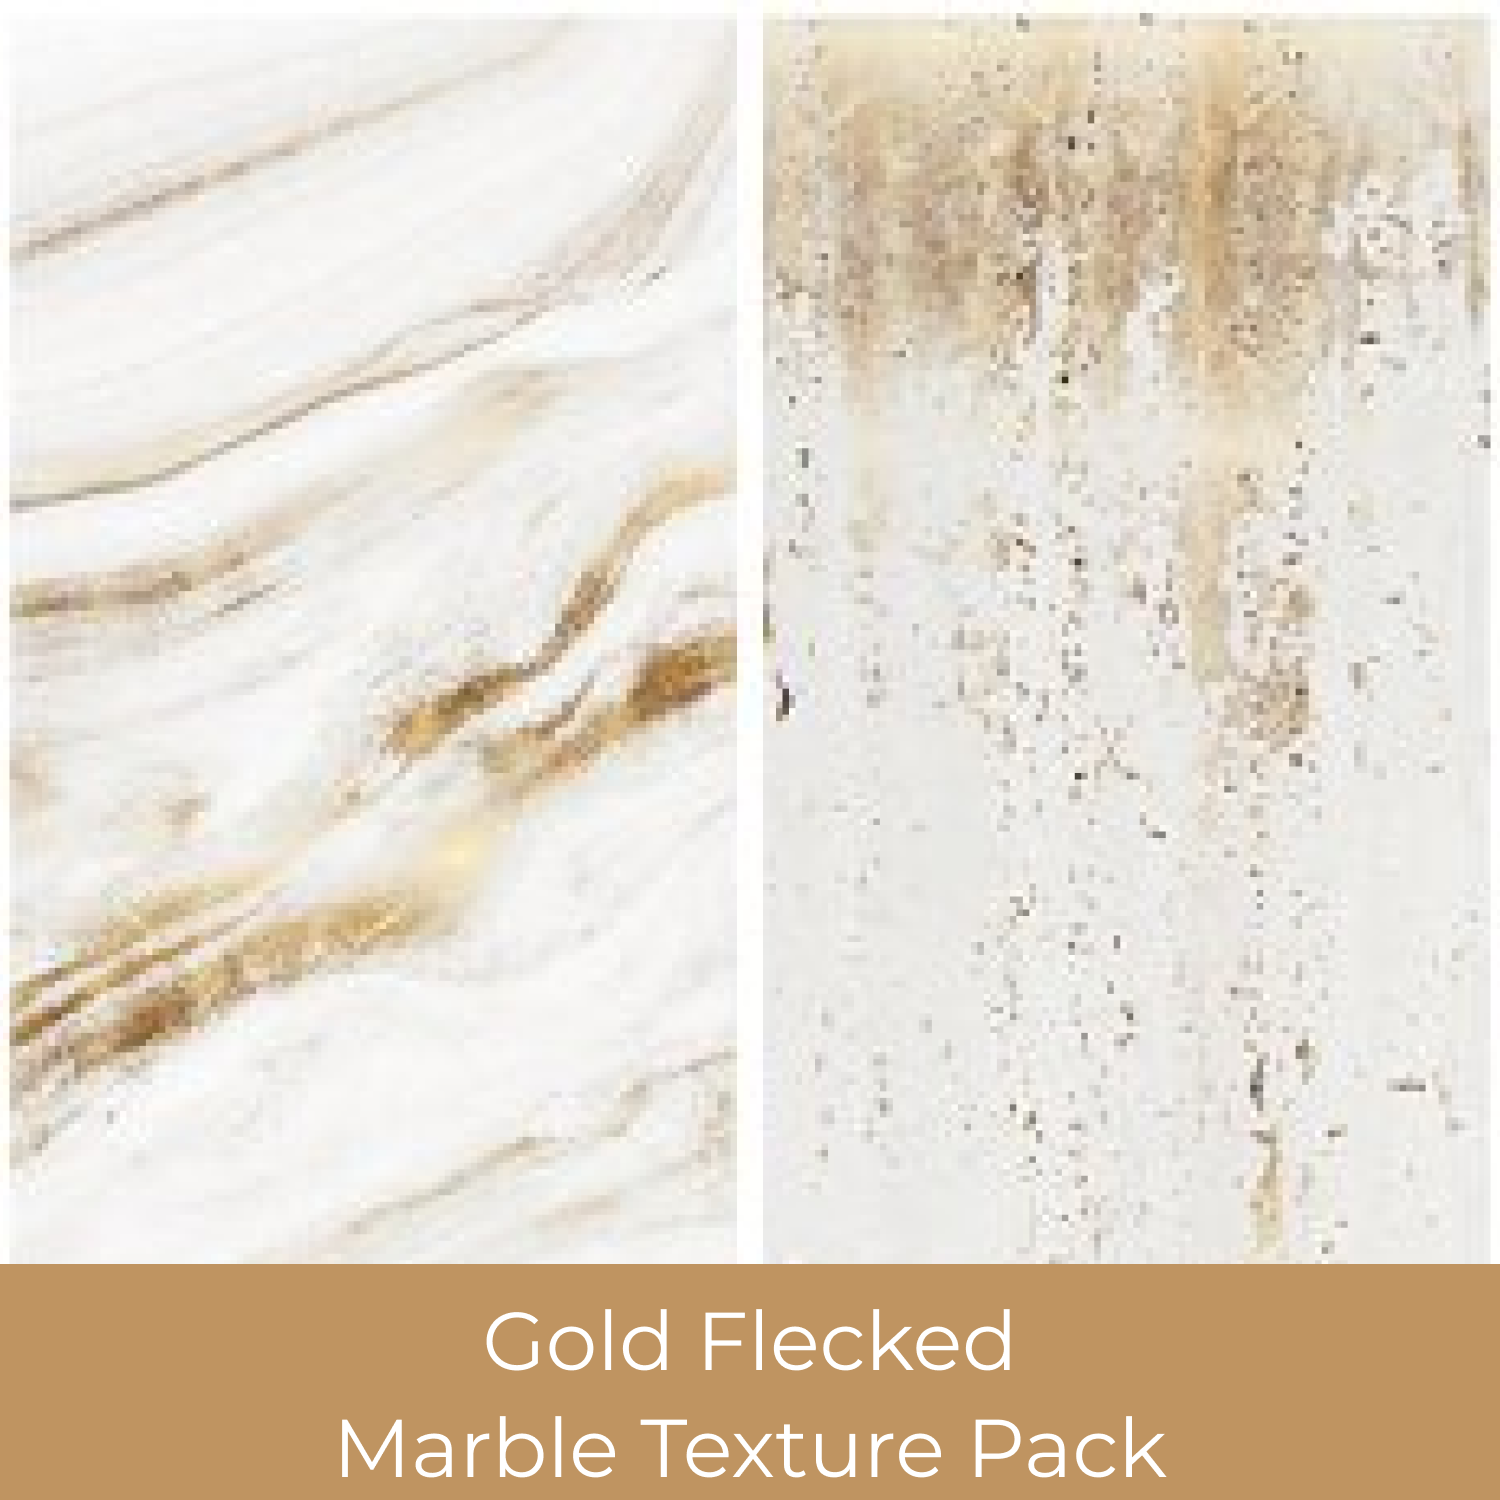 Gold Flecked Marble Texture Pack cover.